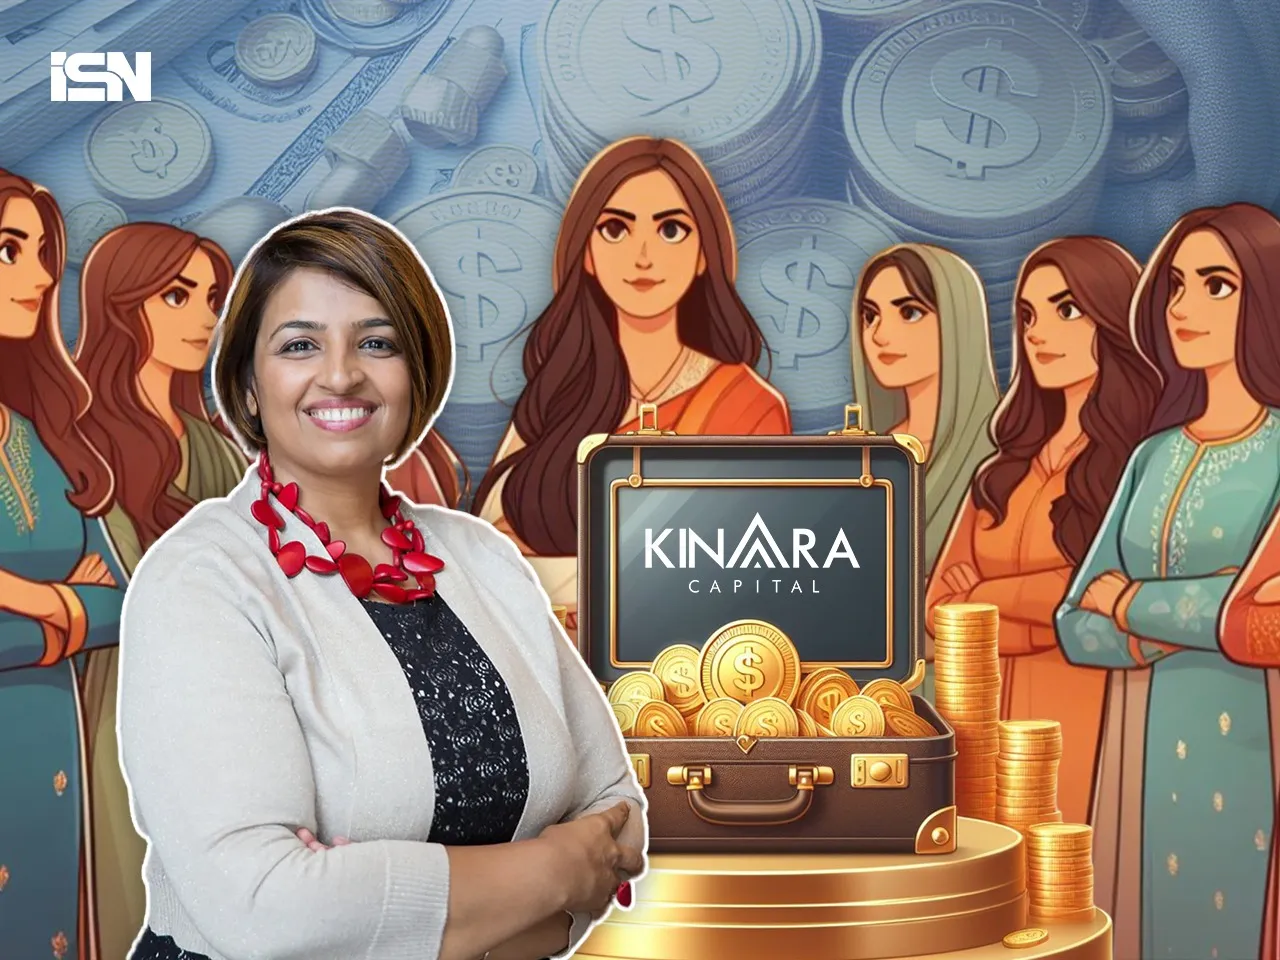 Kinara Capital launches Rs 500 crore fund to empower women entrepreneurs